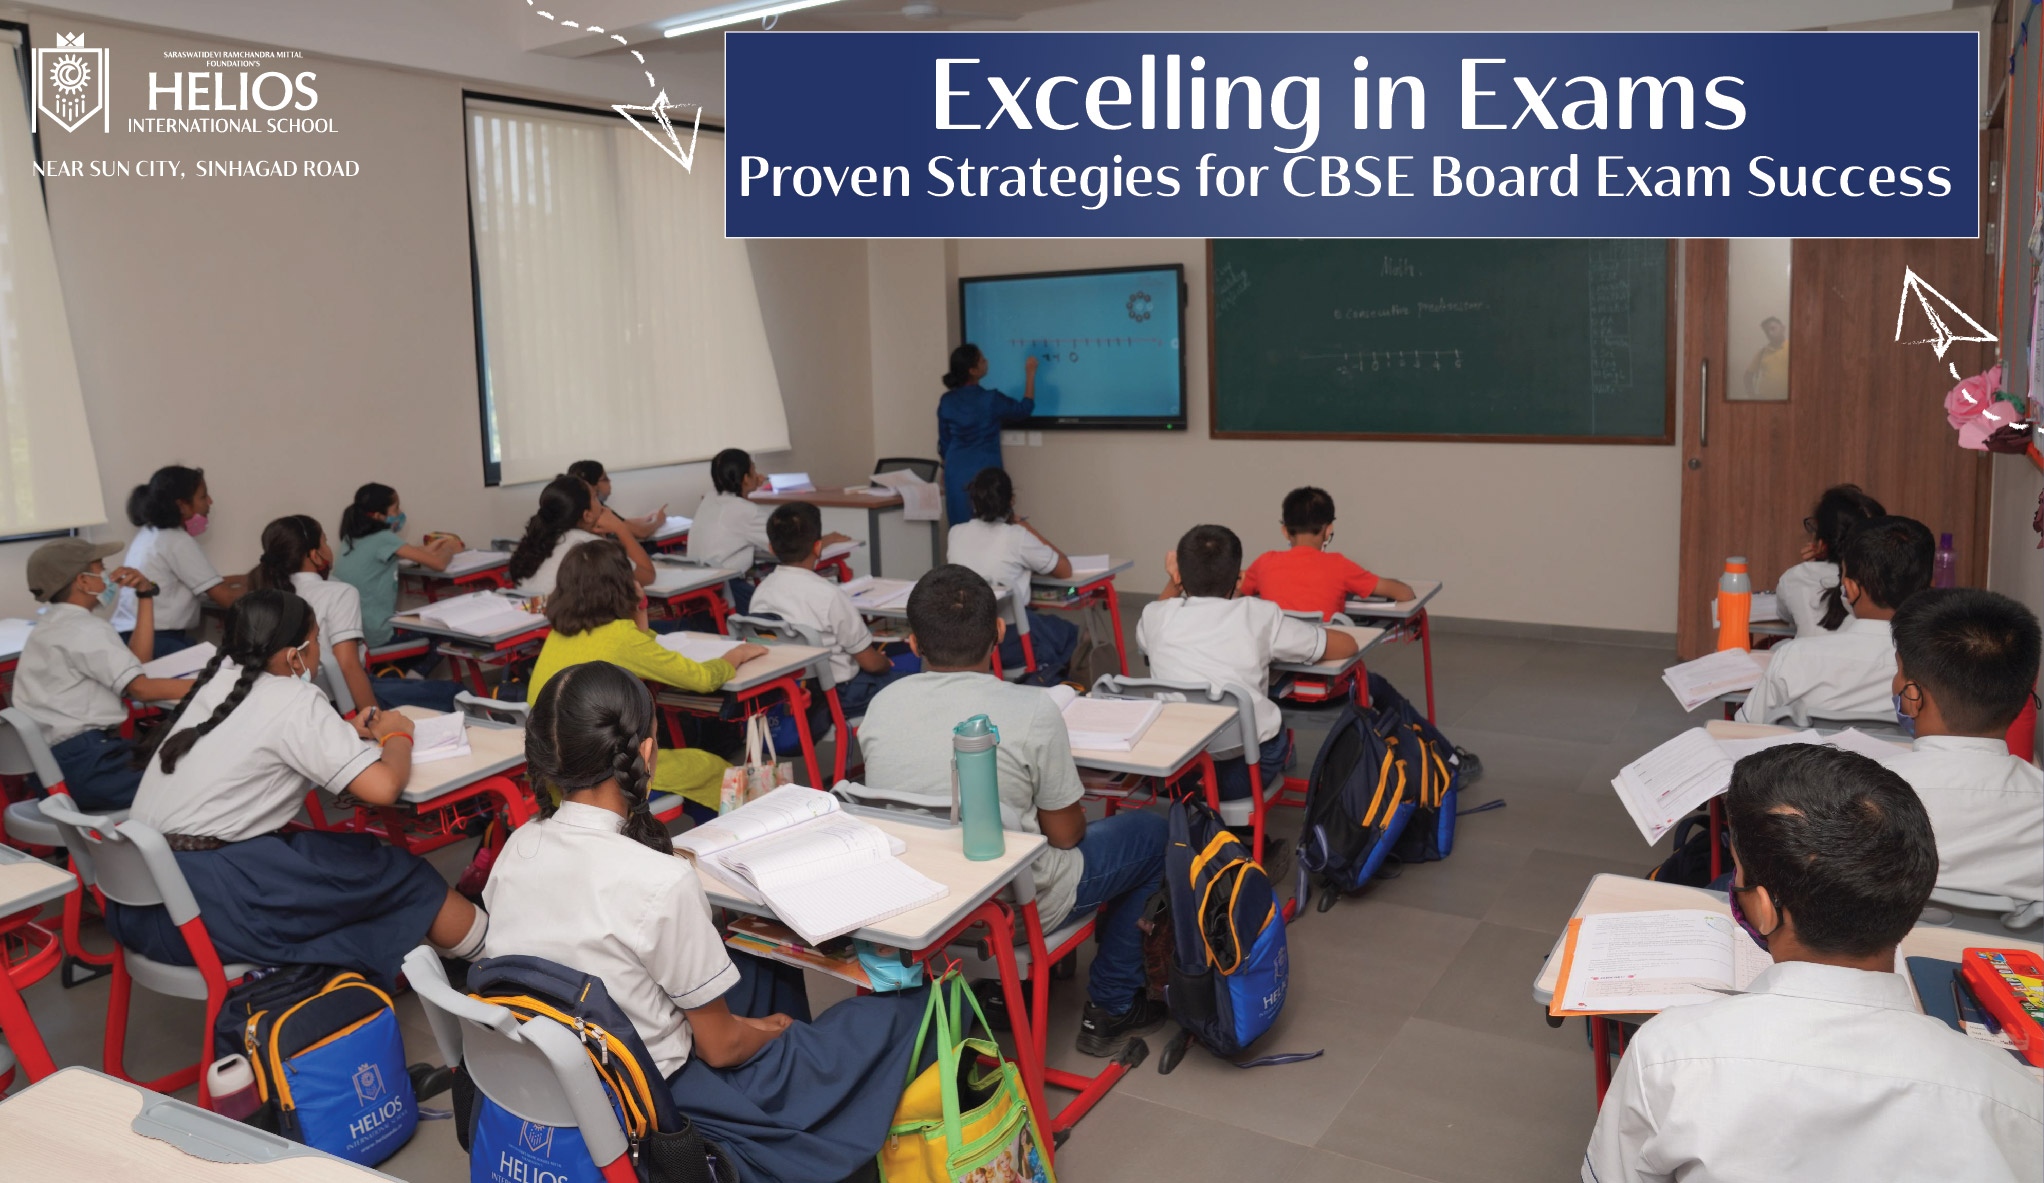 Excelling in Exams: Proven Strategies for CBSE Board Exam Success